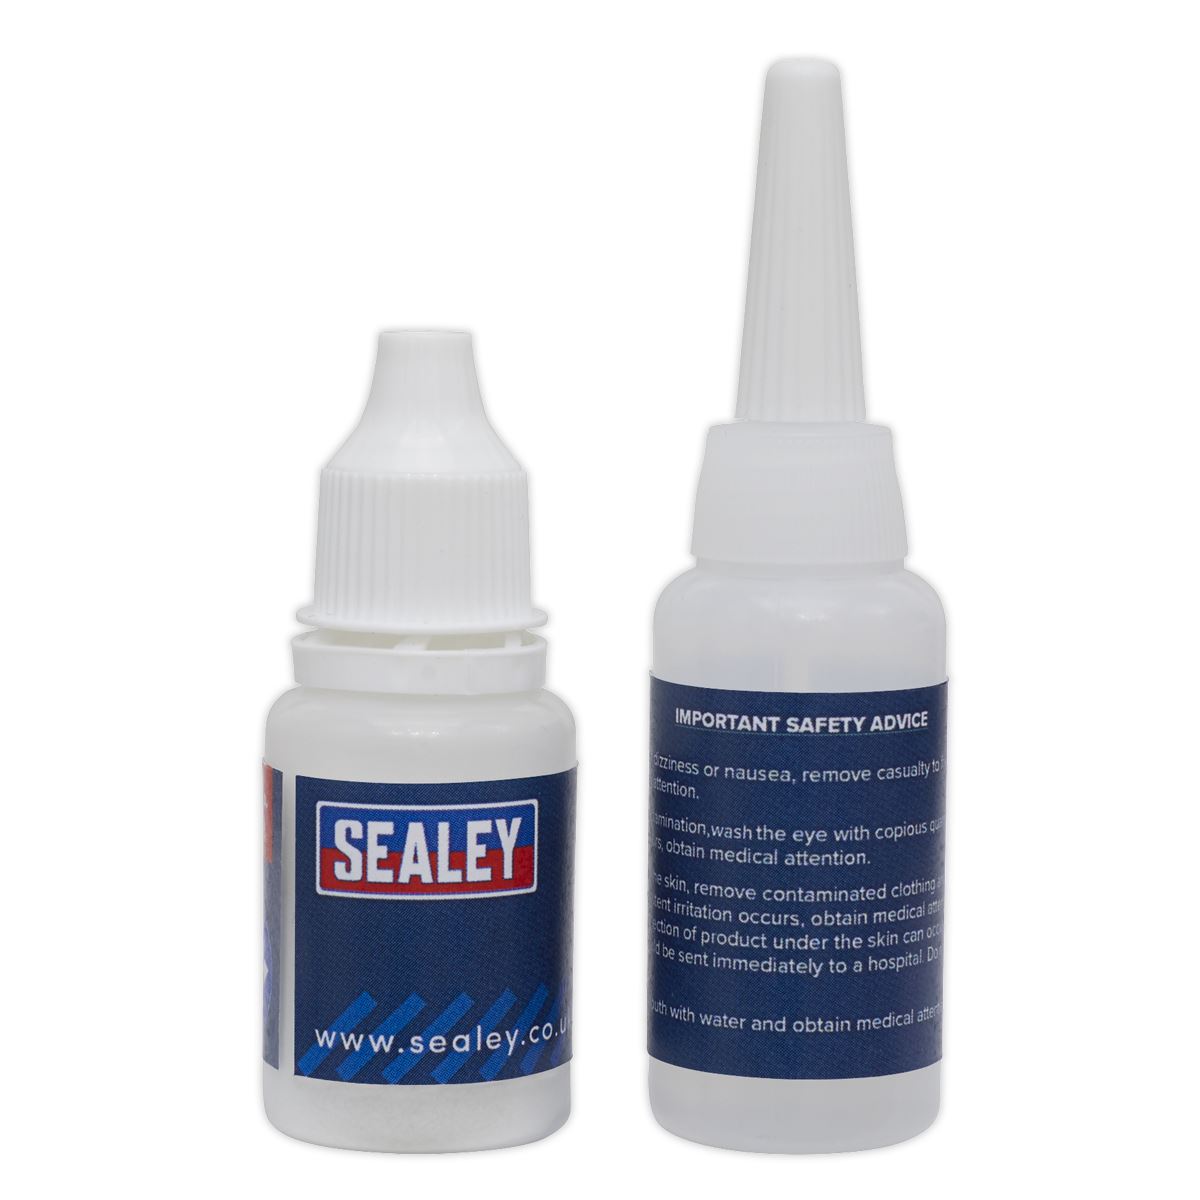 Sealey Fast Fix Filler and Adhesive Two Part Repair System Black